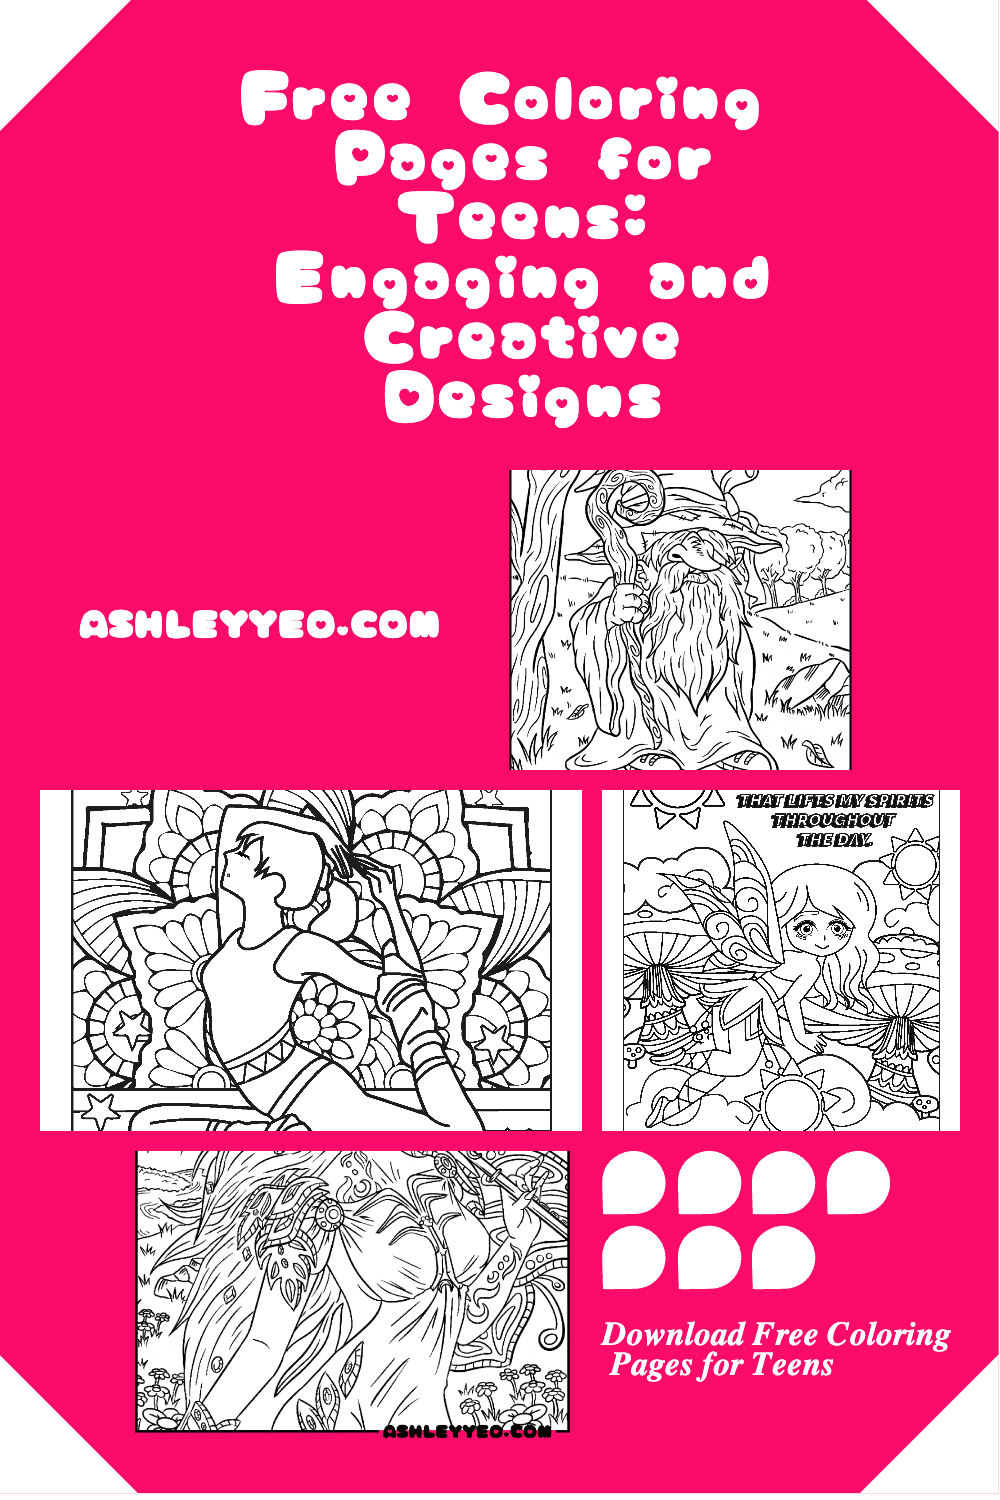 Free Coloring Pages for Teens: Engaging and Creative Designs